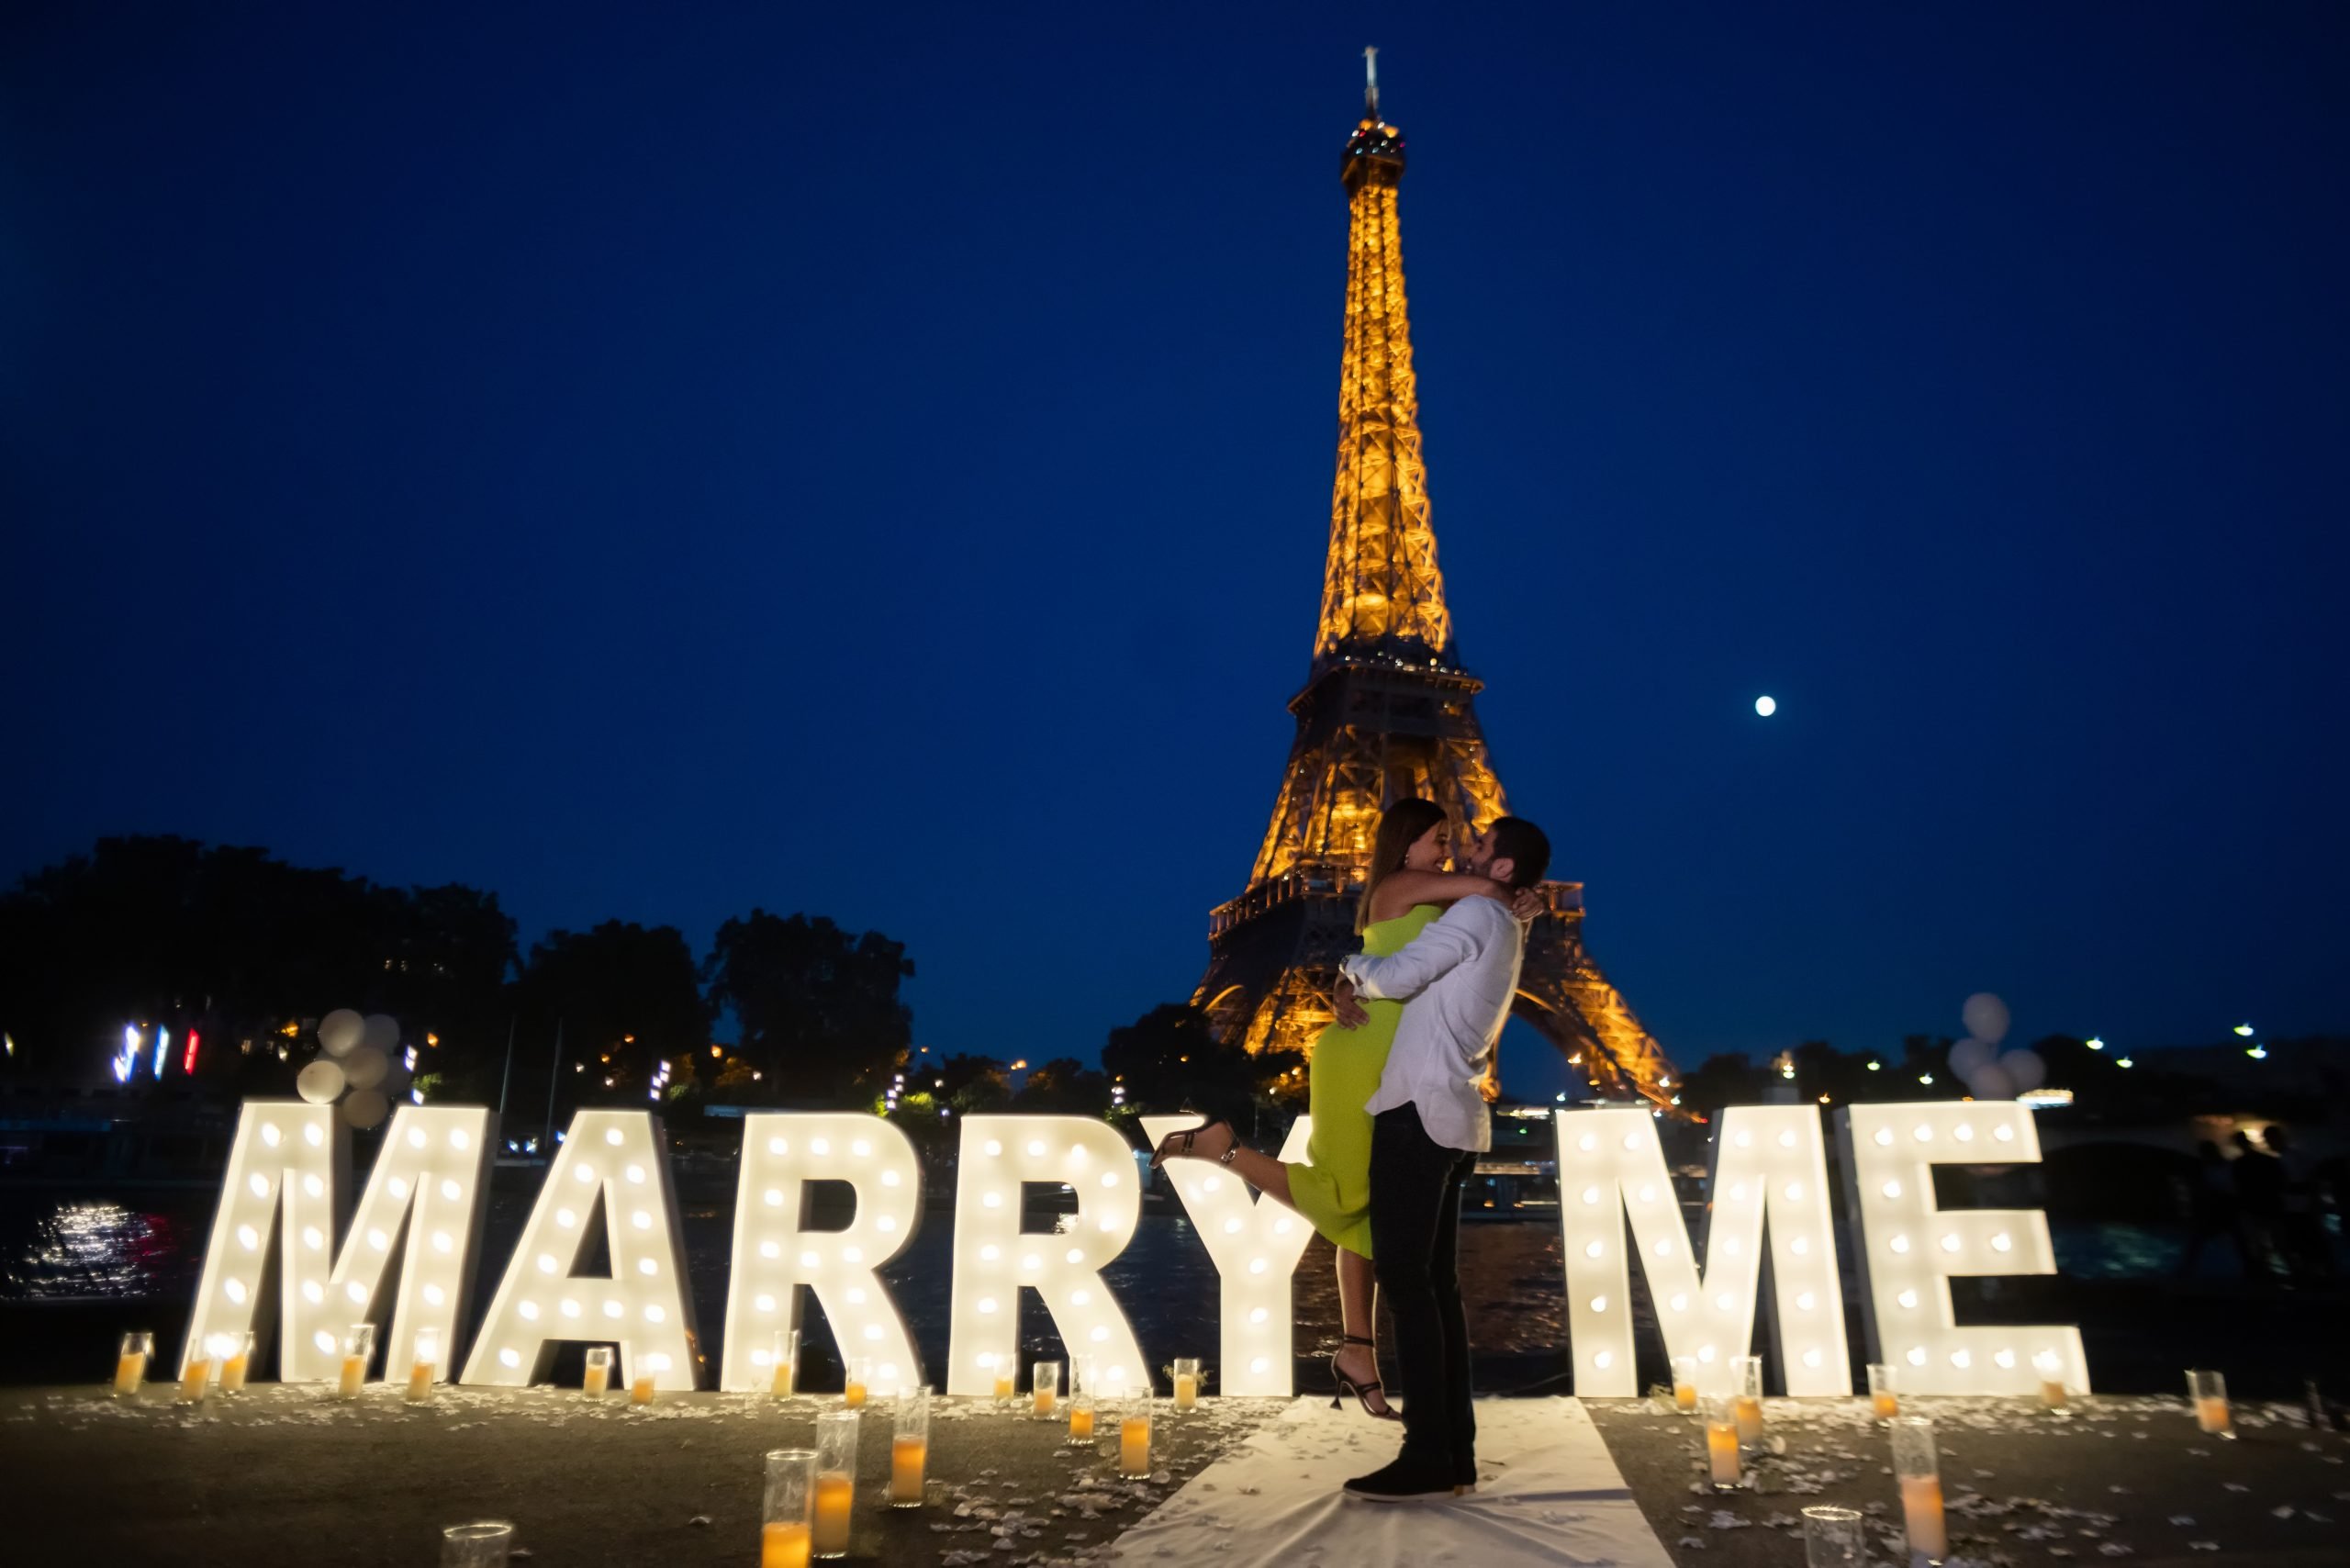 Our packages for the best proposal in Paris